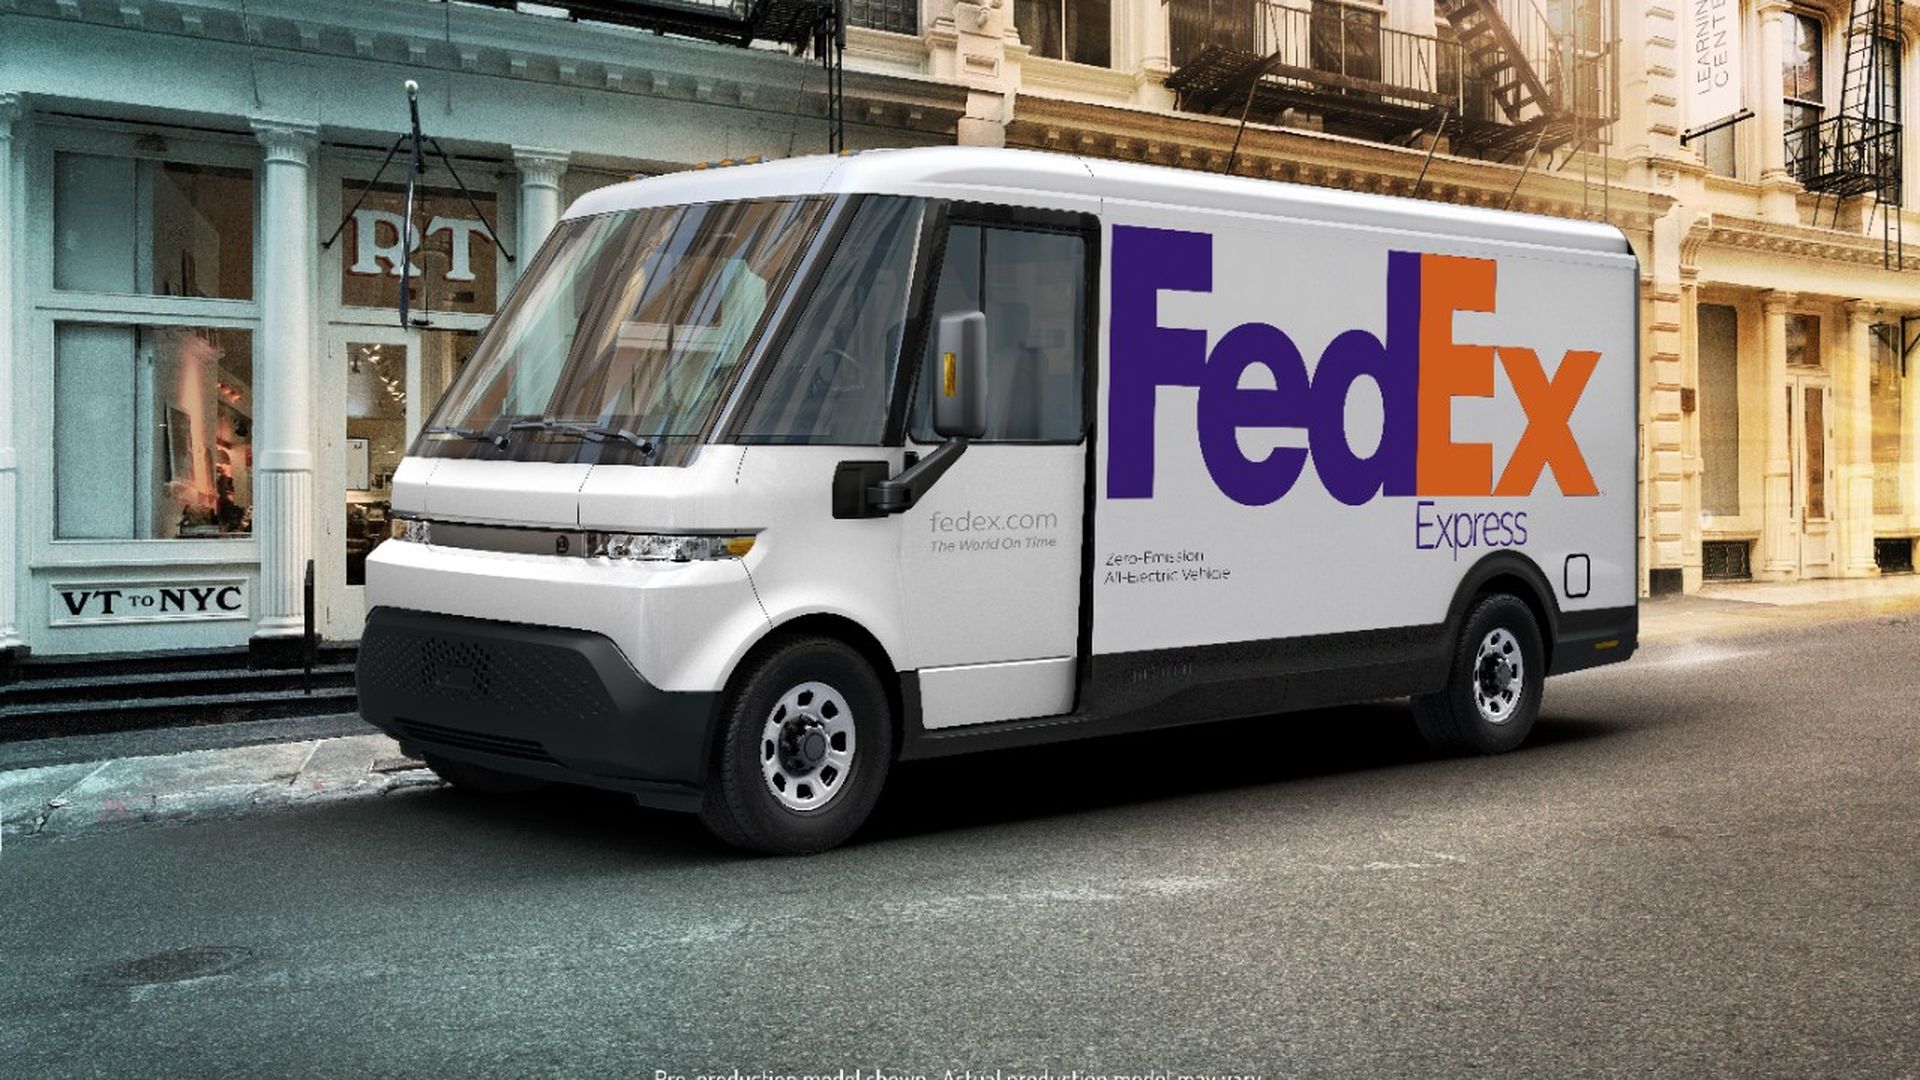 Image of GM's EV 600 electric delivery truck with FedEx branding on the side